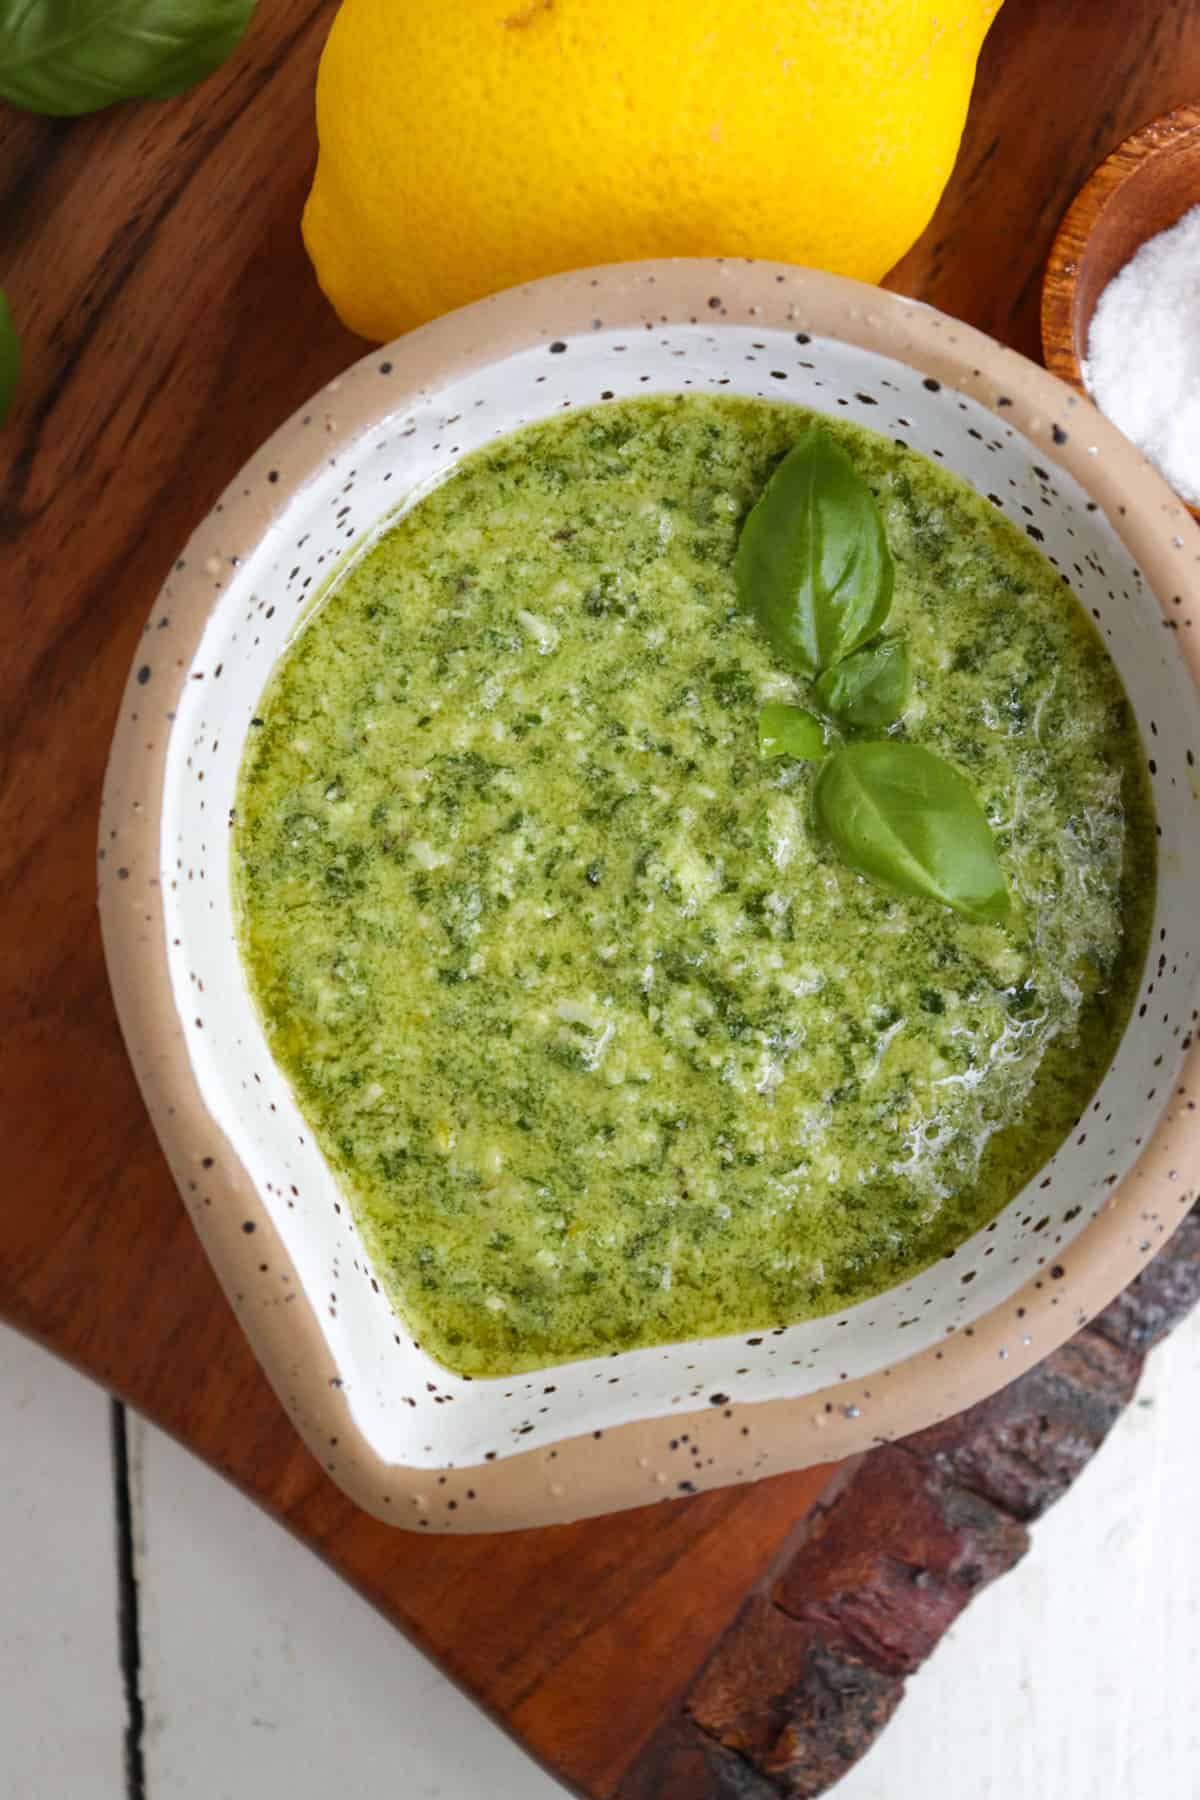 small bowl of finished pesto garnished with basil.